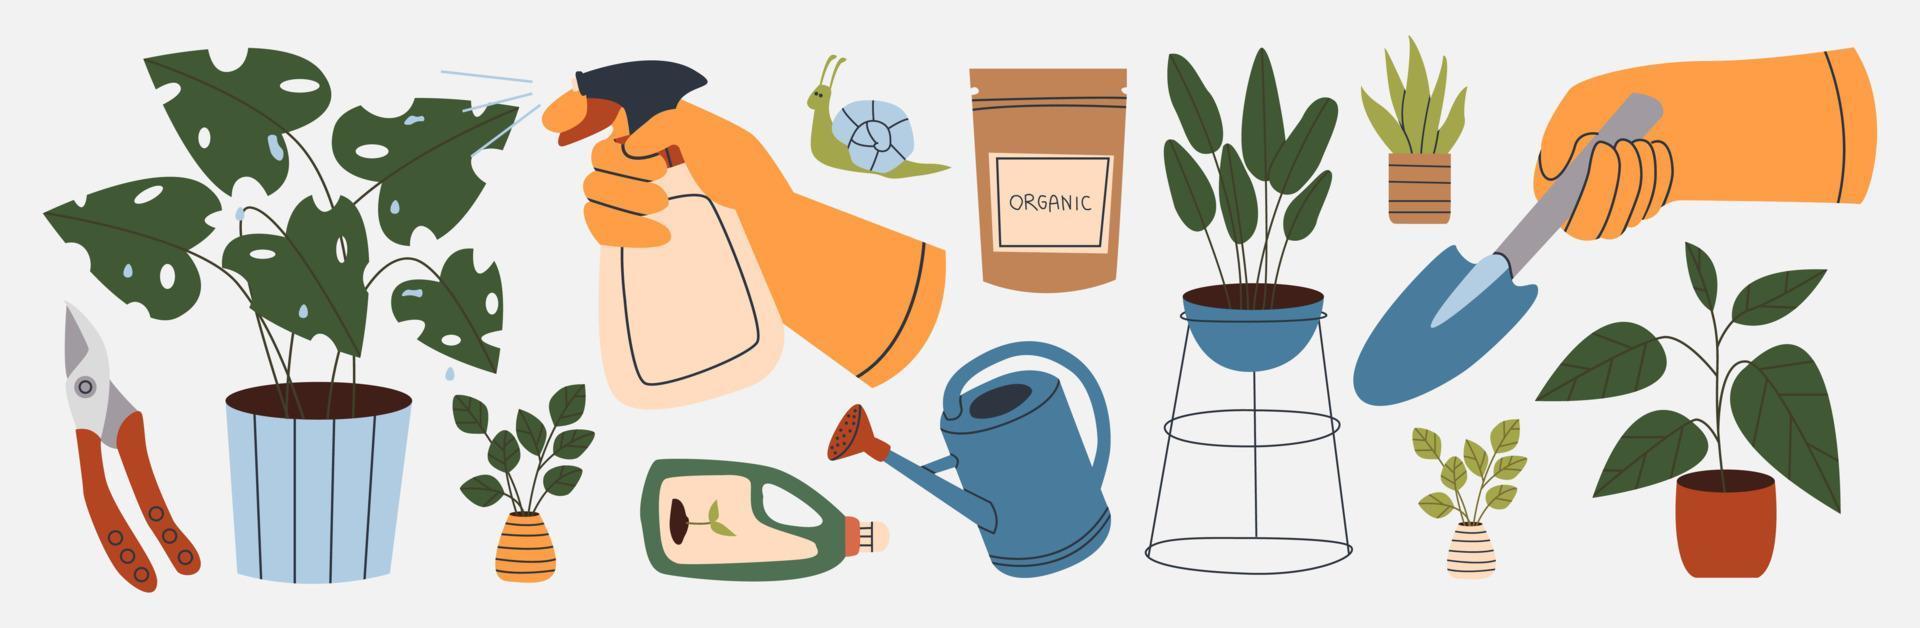 Home gardening and growing houseplants set. Illustration of plants, flower pots, garden tools. Various hands watering, planting. Colored flat  illustration.Isolated elements on white vector